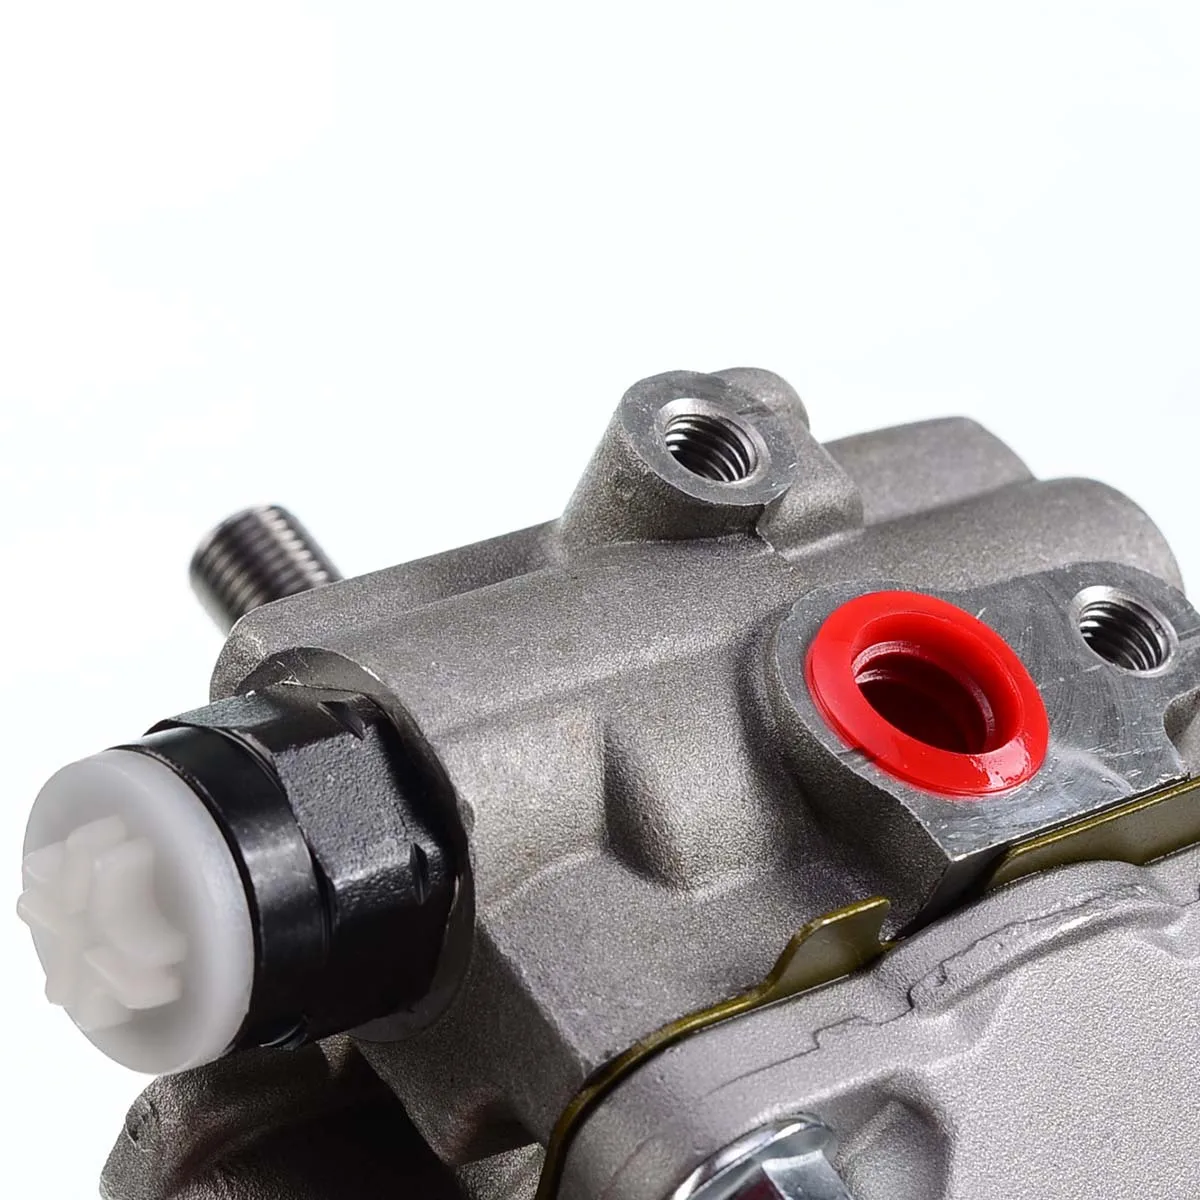 

In-stock CN US Power Steering Pump Reservoir for Toyota Paseo Tercel l4 1.5L 97-99 21-5988 4432016310